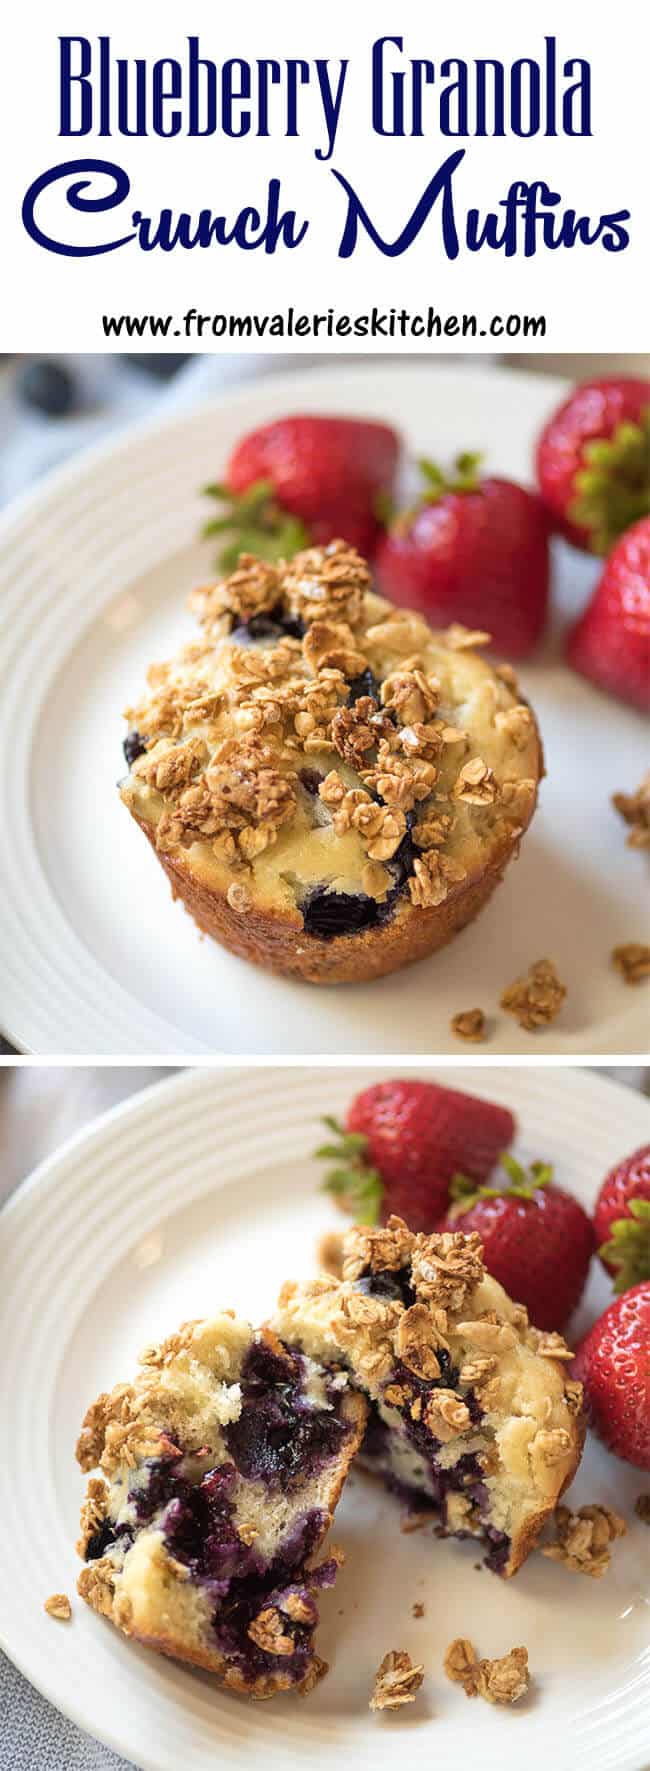 A two image vertical collage of Blueberry Granola Crunch Muffins with text overlay.